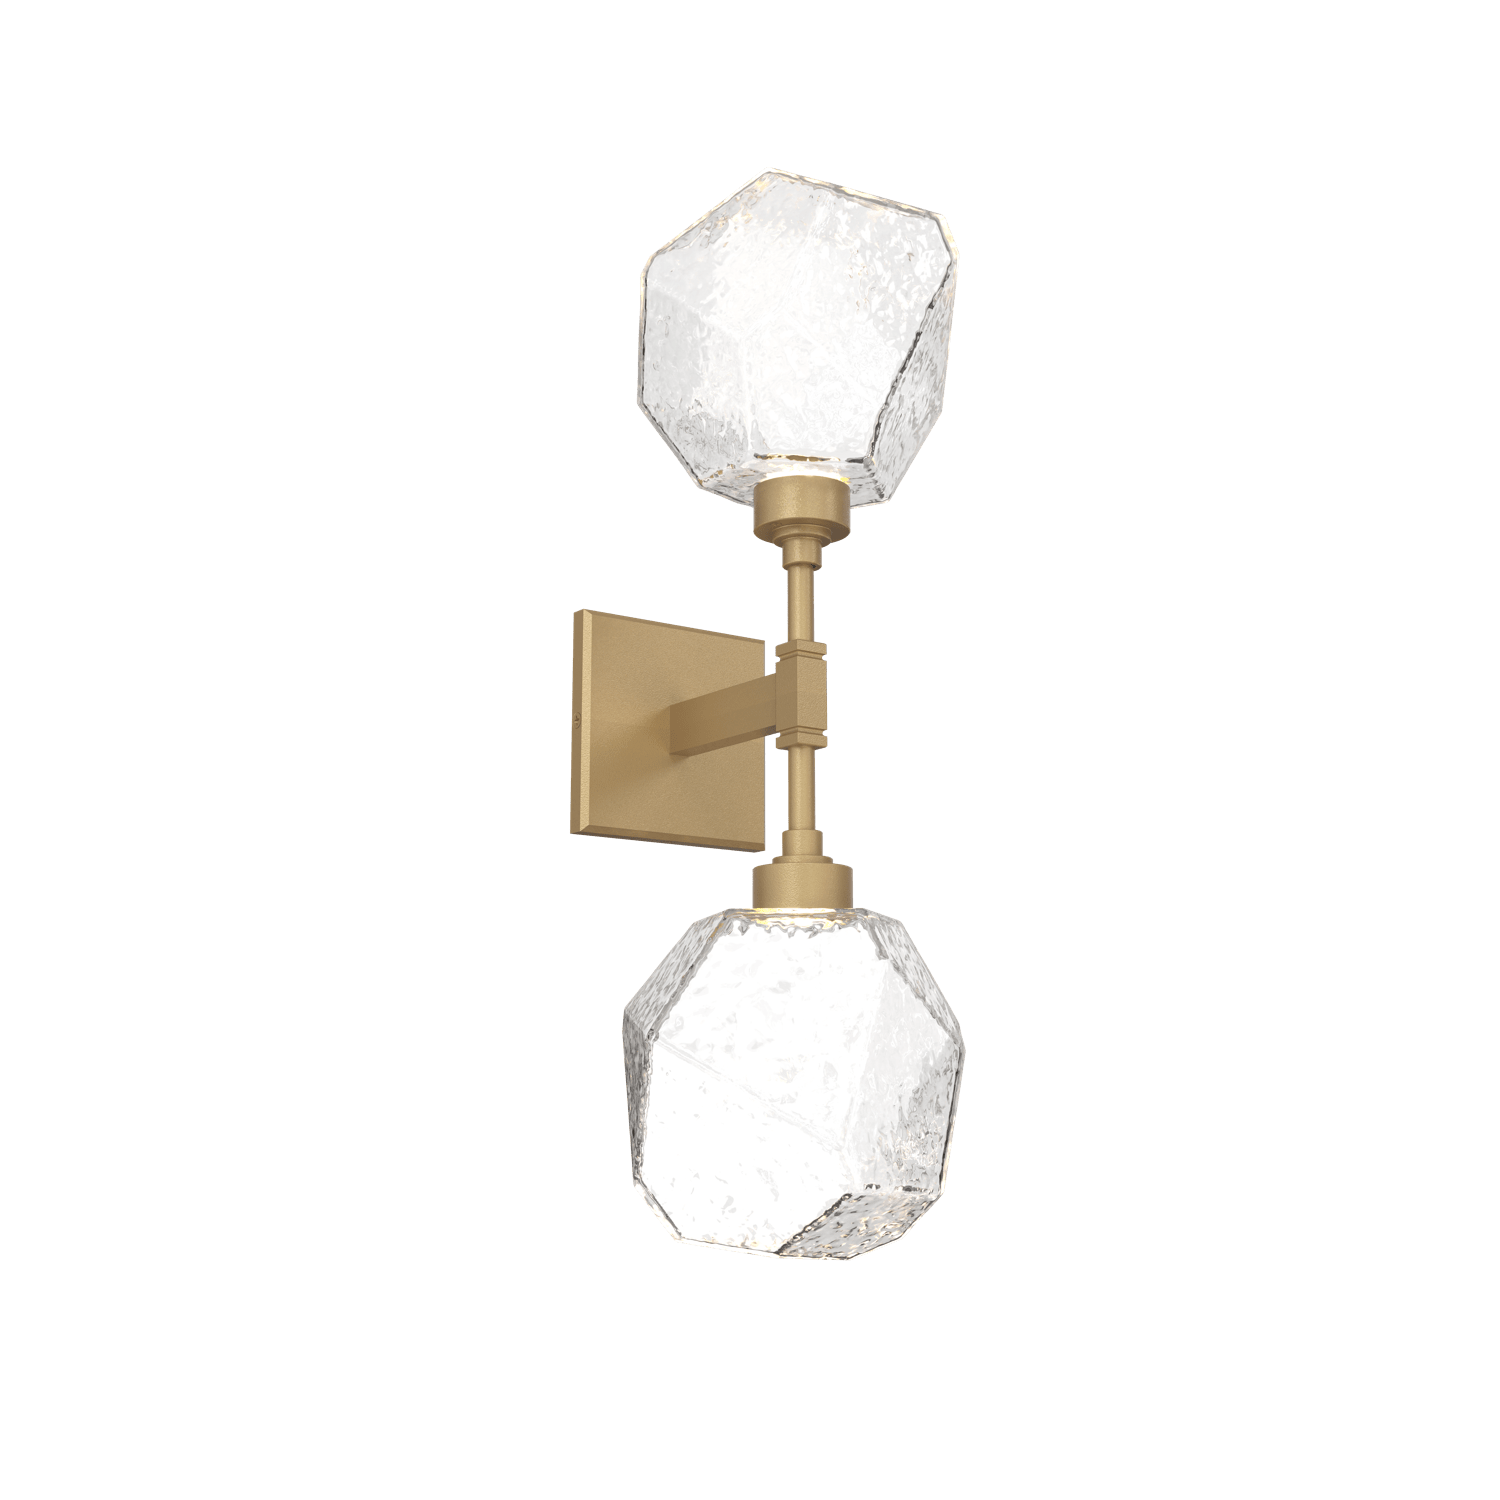 IDB0039-02-GB-C-Hammerton-Studio-Gem-double-wall-sconce-with-gilded-brass-finish-and-clear-blown-glass-shades-and-LED-lamping